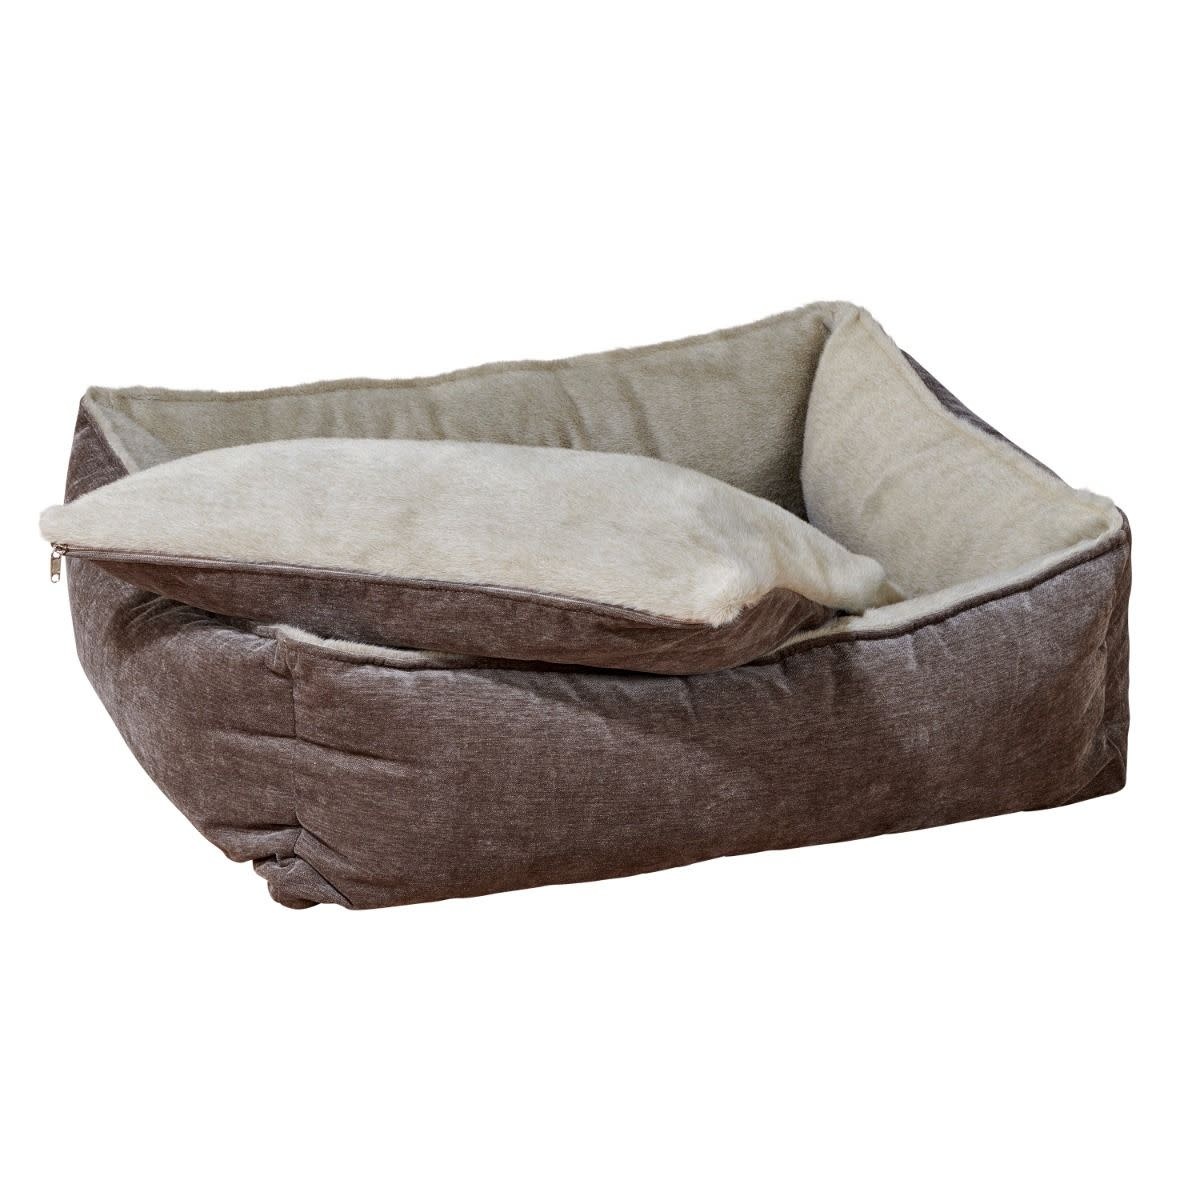 Bowsers Pet Products Bowsers B Lounge